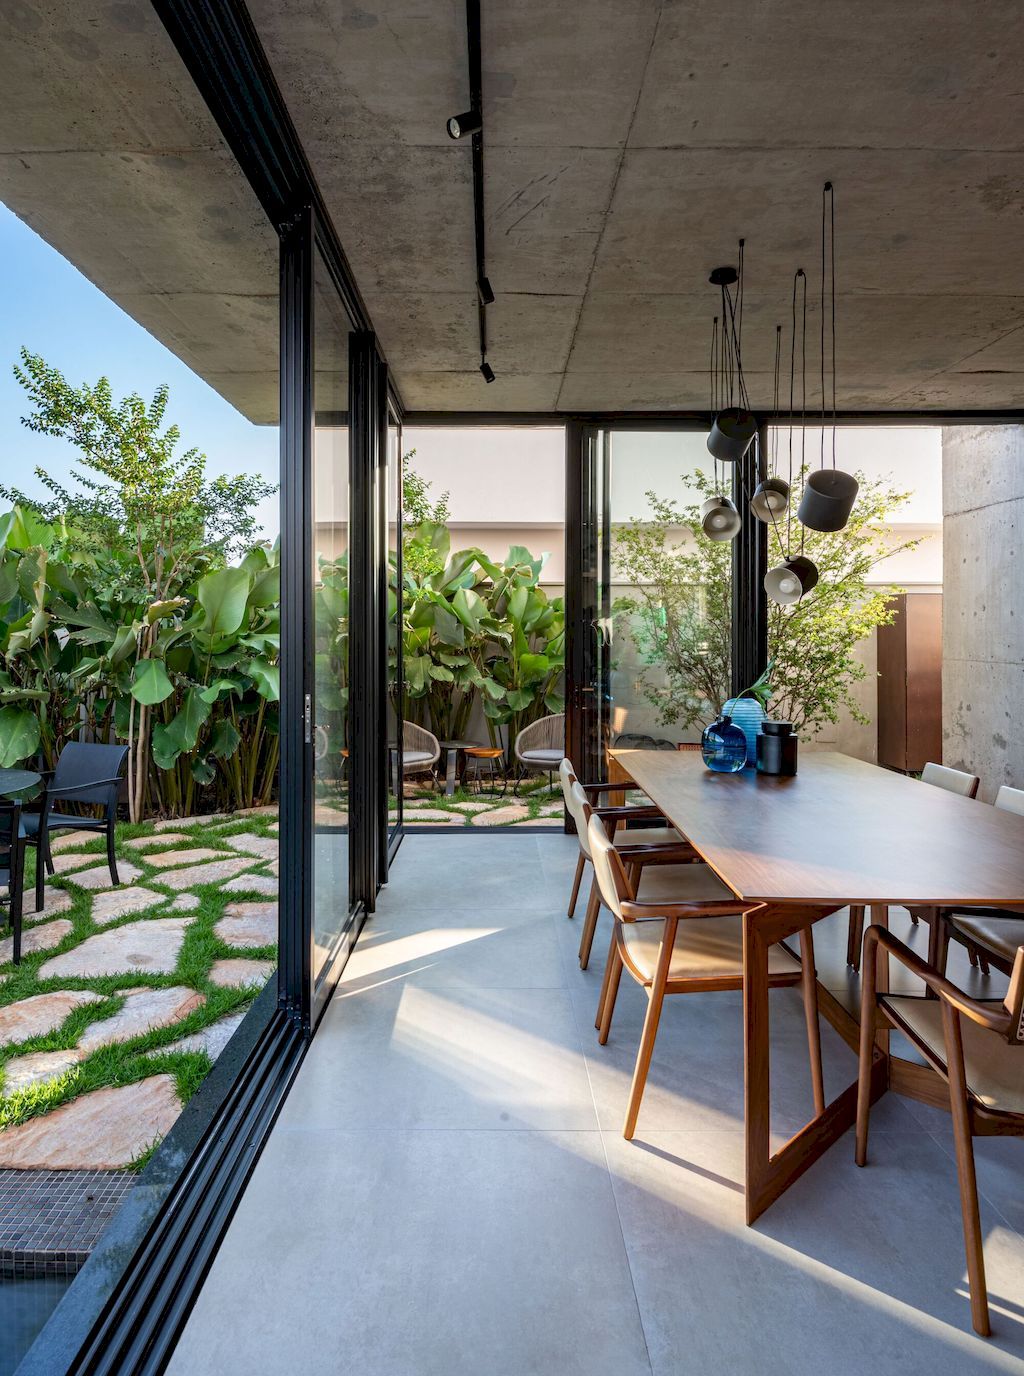 U House with Welcoming Environment by Caio Persighini Arquitetura